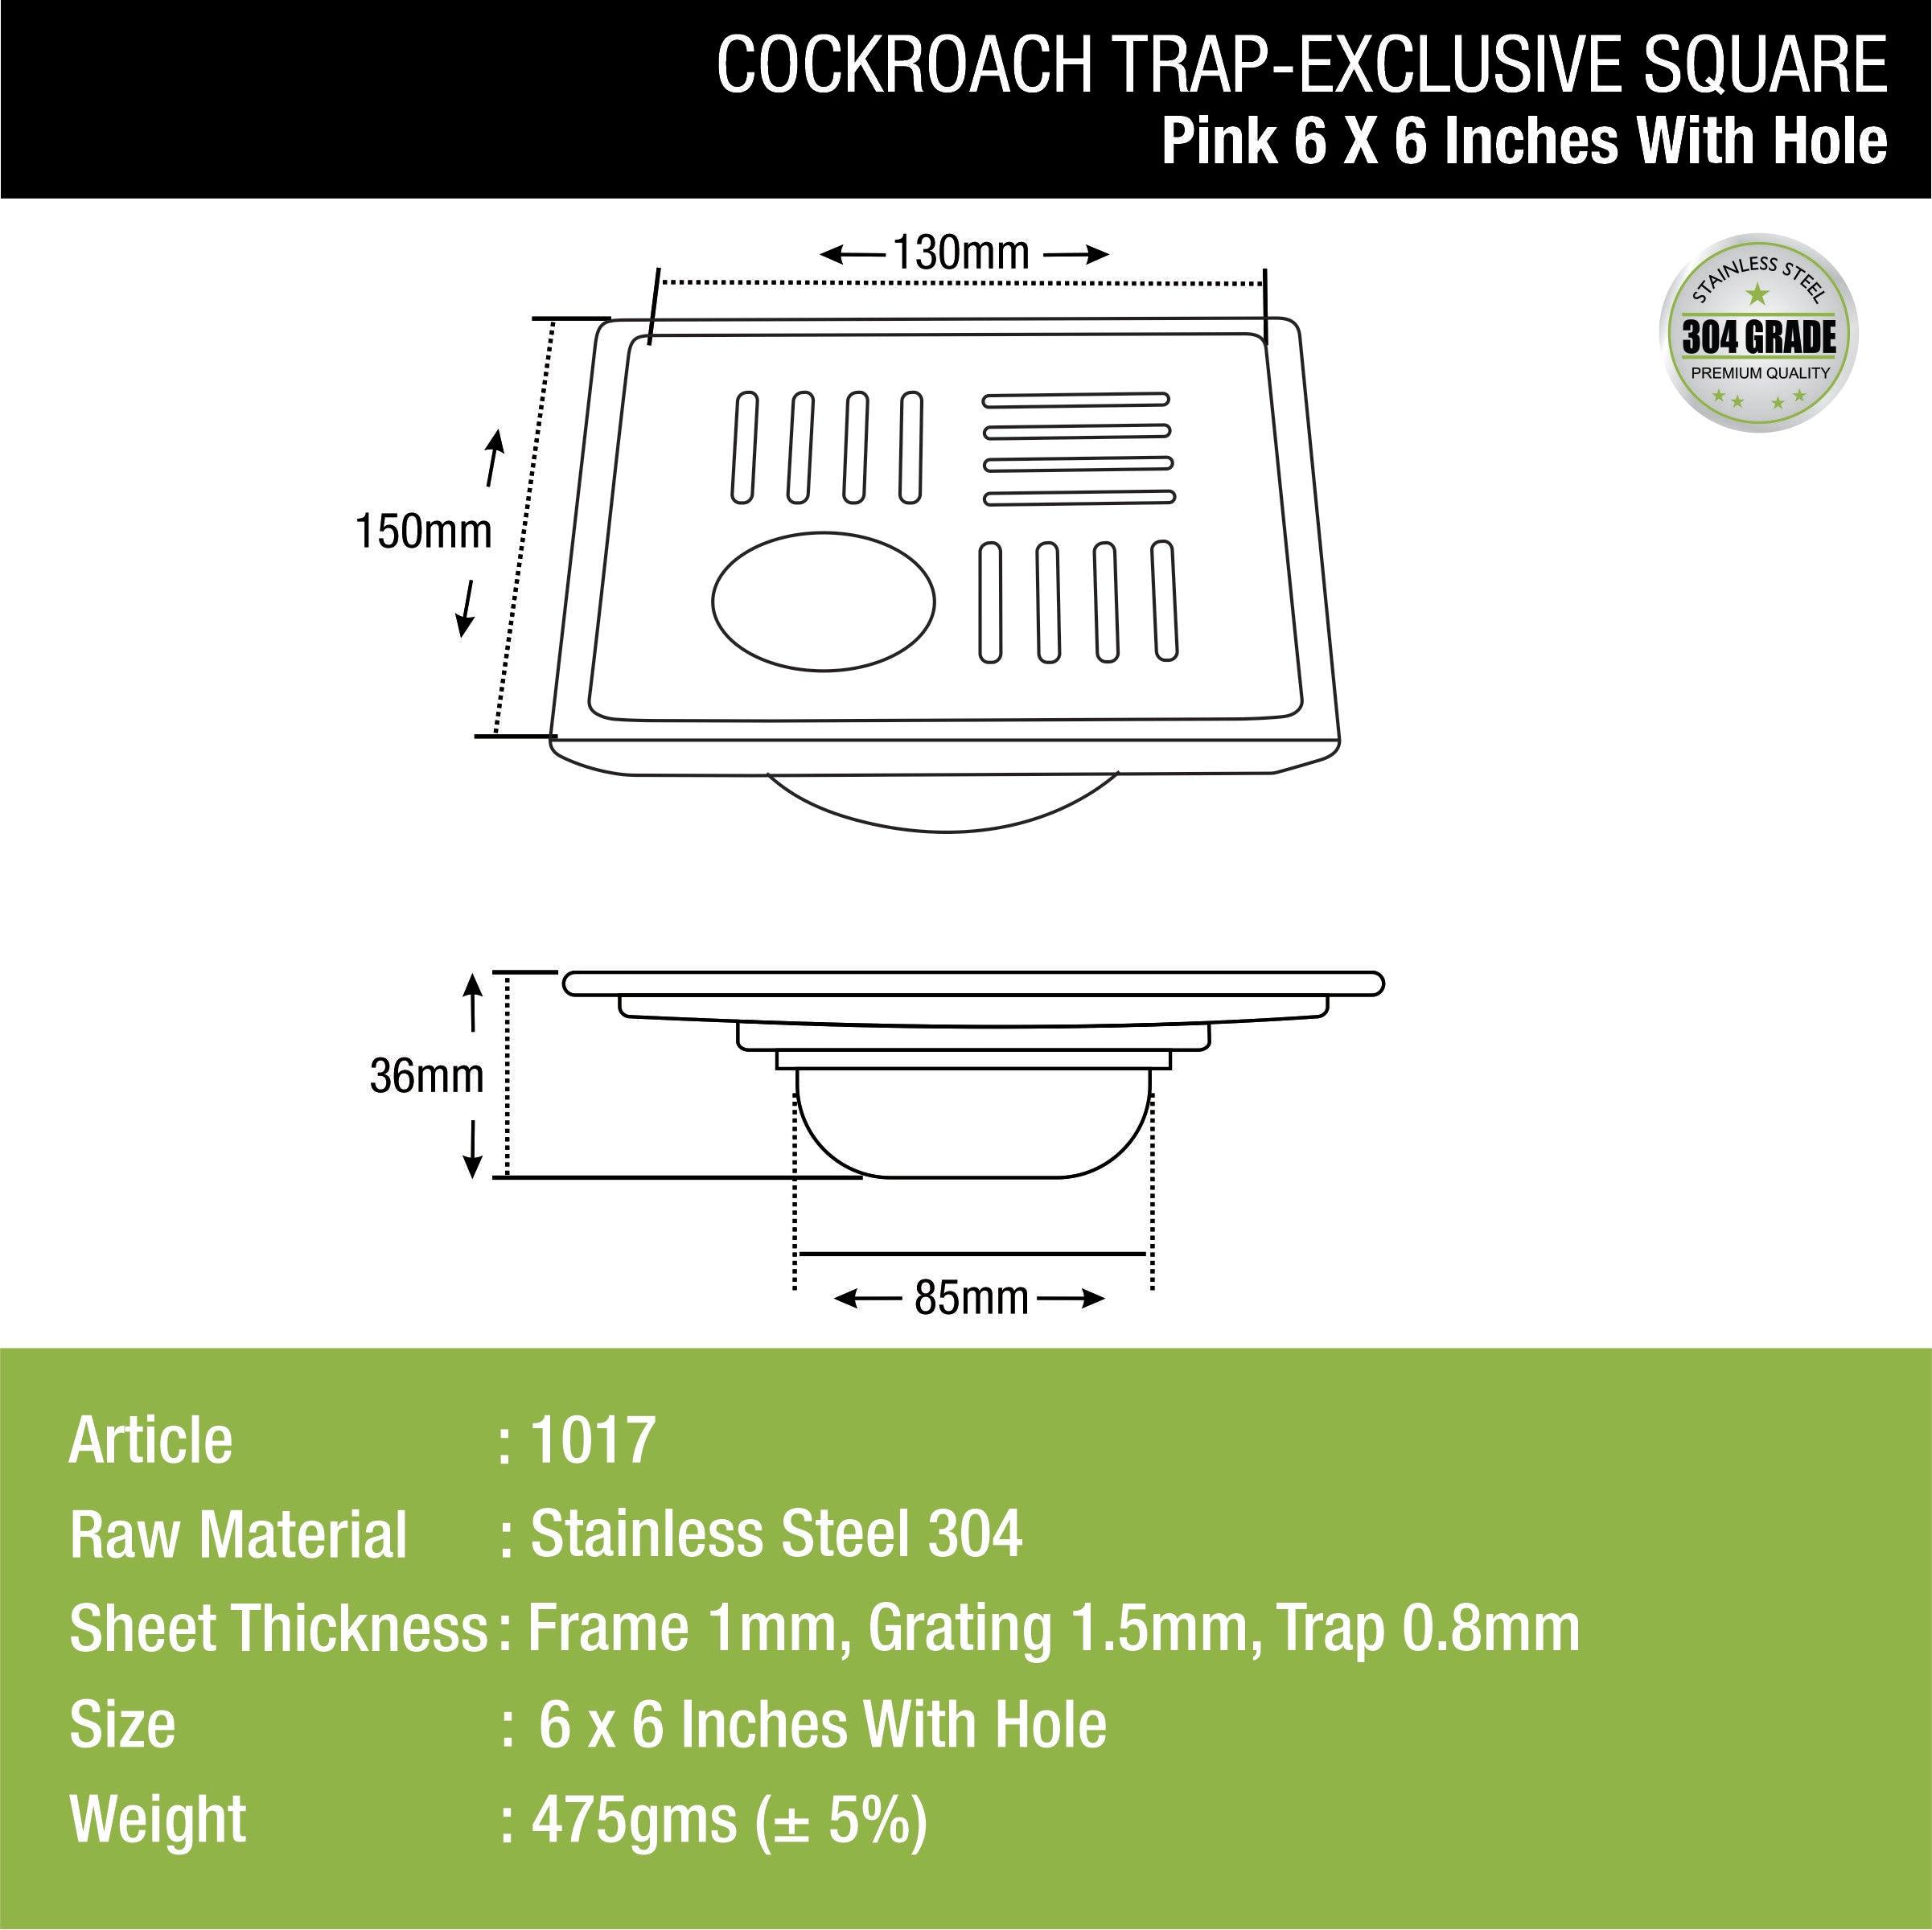 Pink Exclusive Square Floor Drain (6 x 6 Inches) with Hole and Cockroach Trap dimensions and sizes